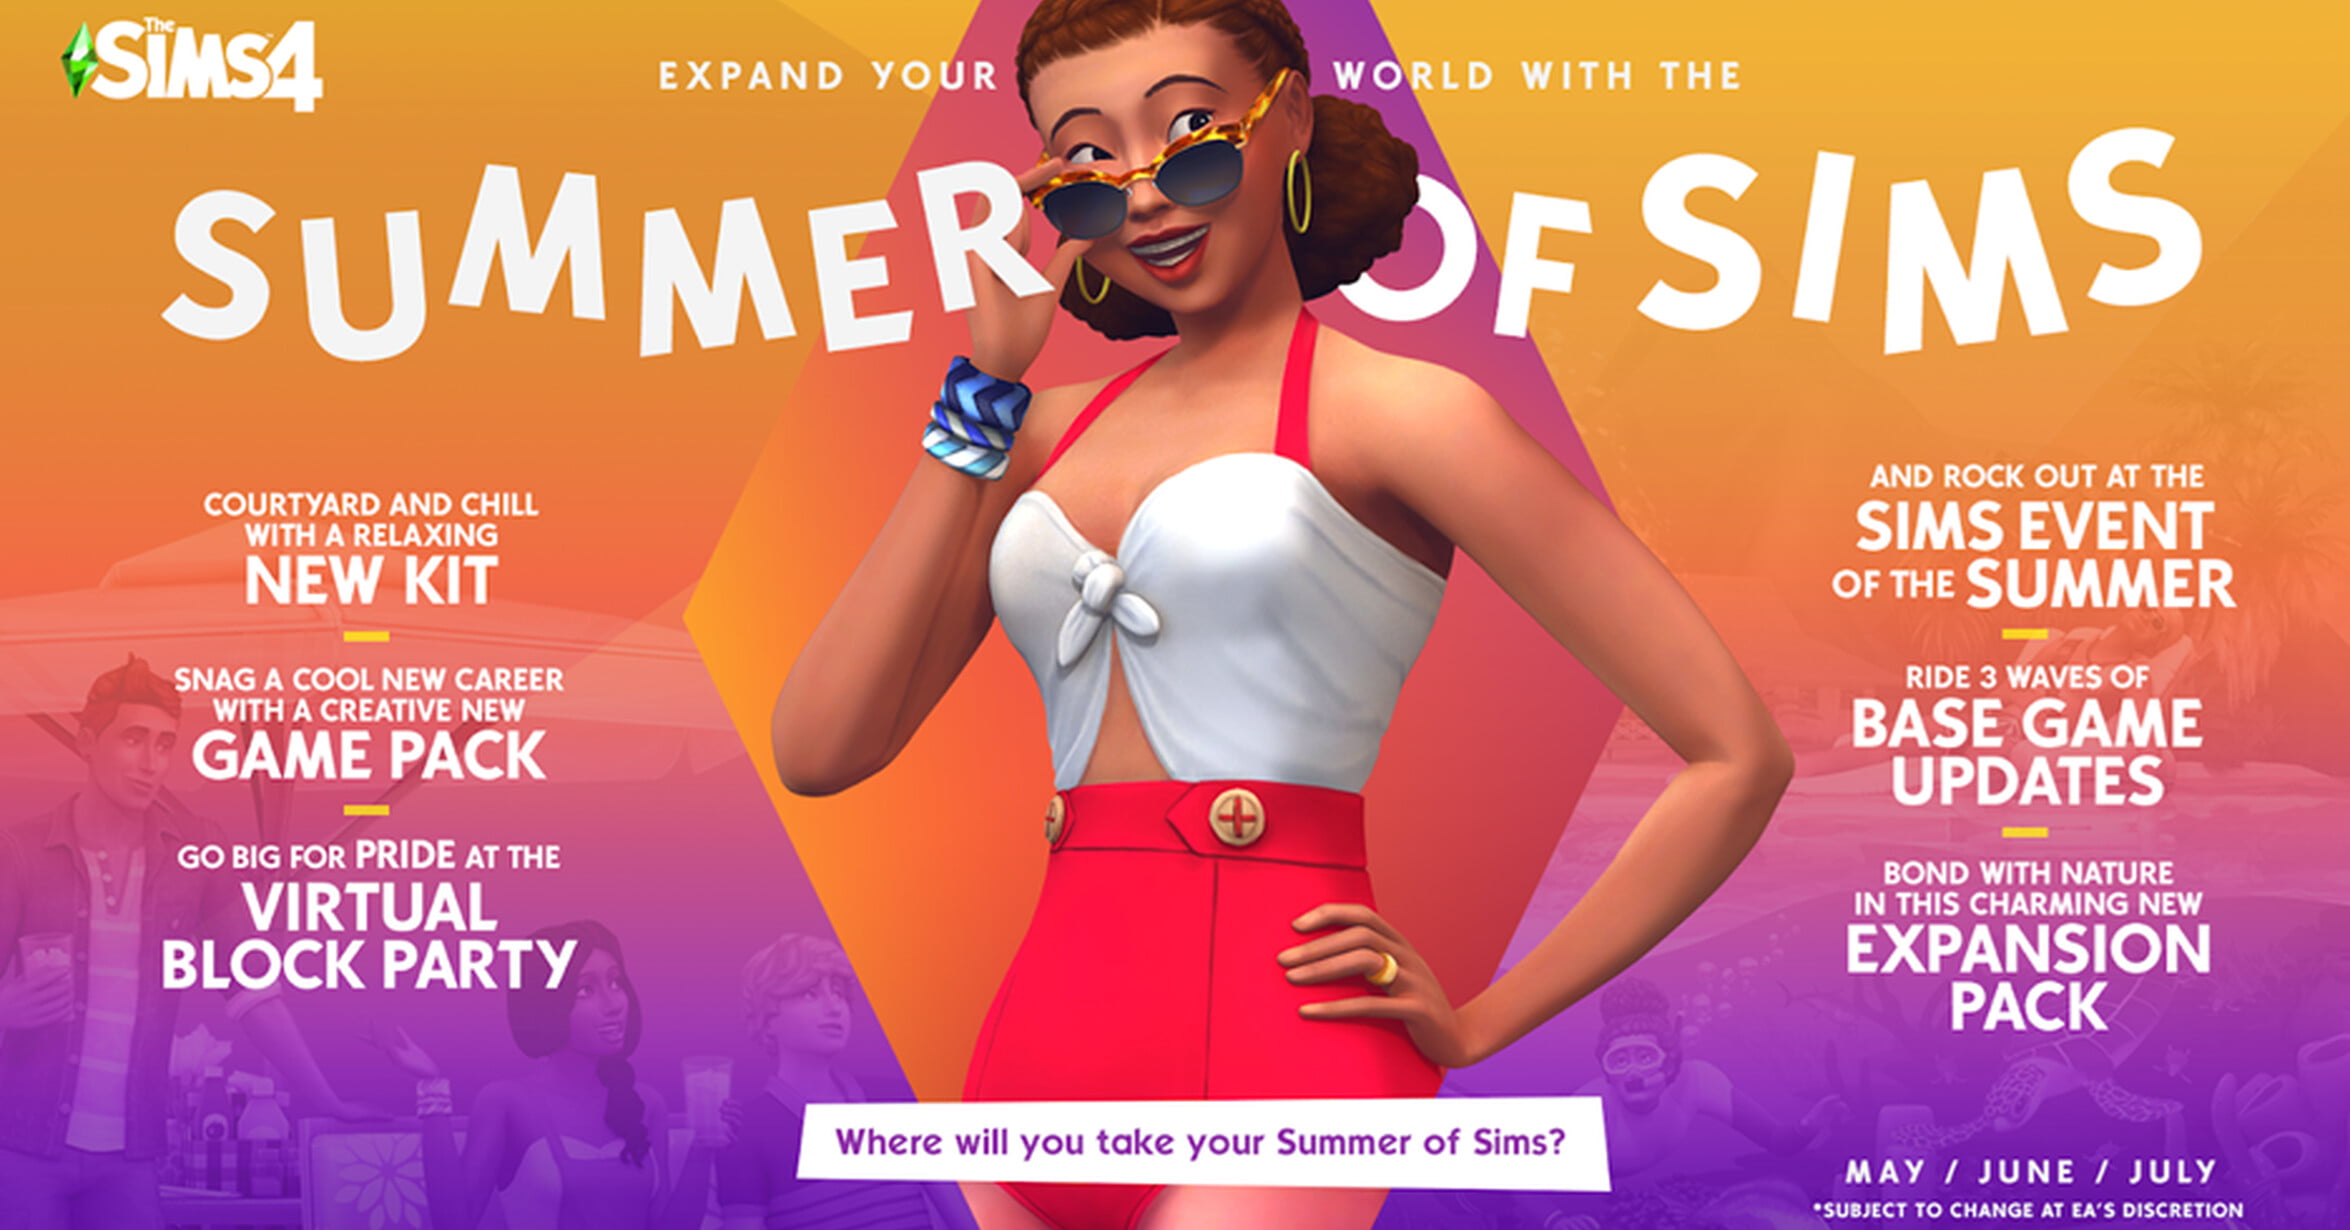 The Sims 4 Releasing Many Updates For Summer 2021